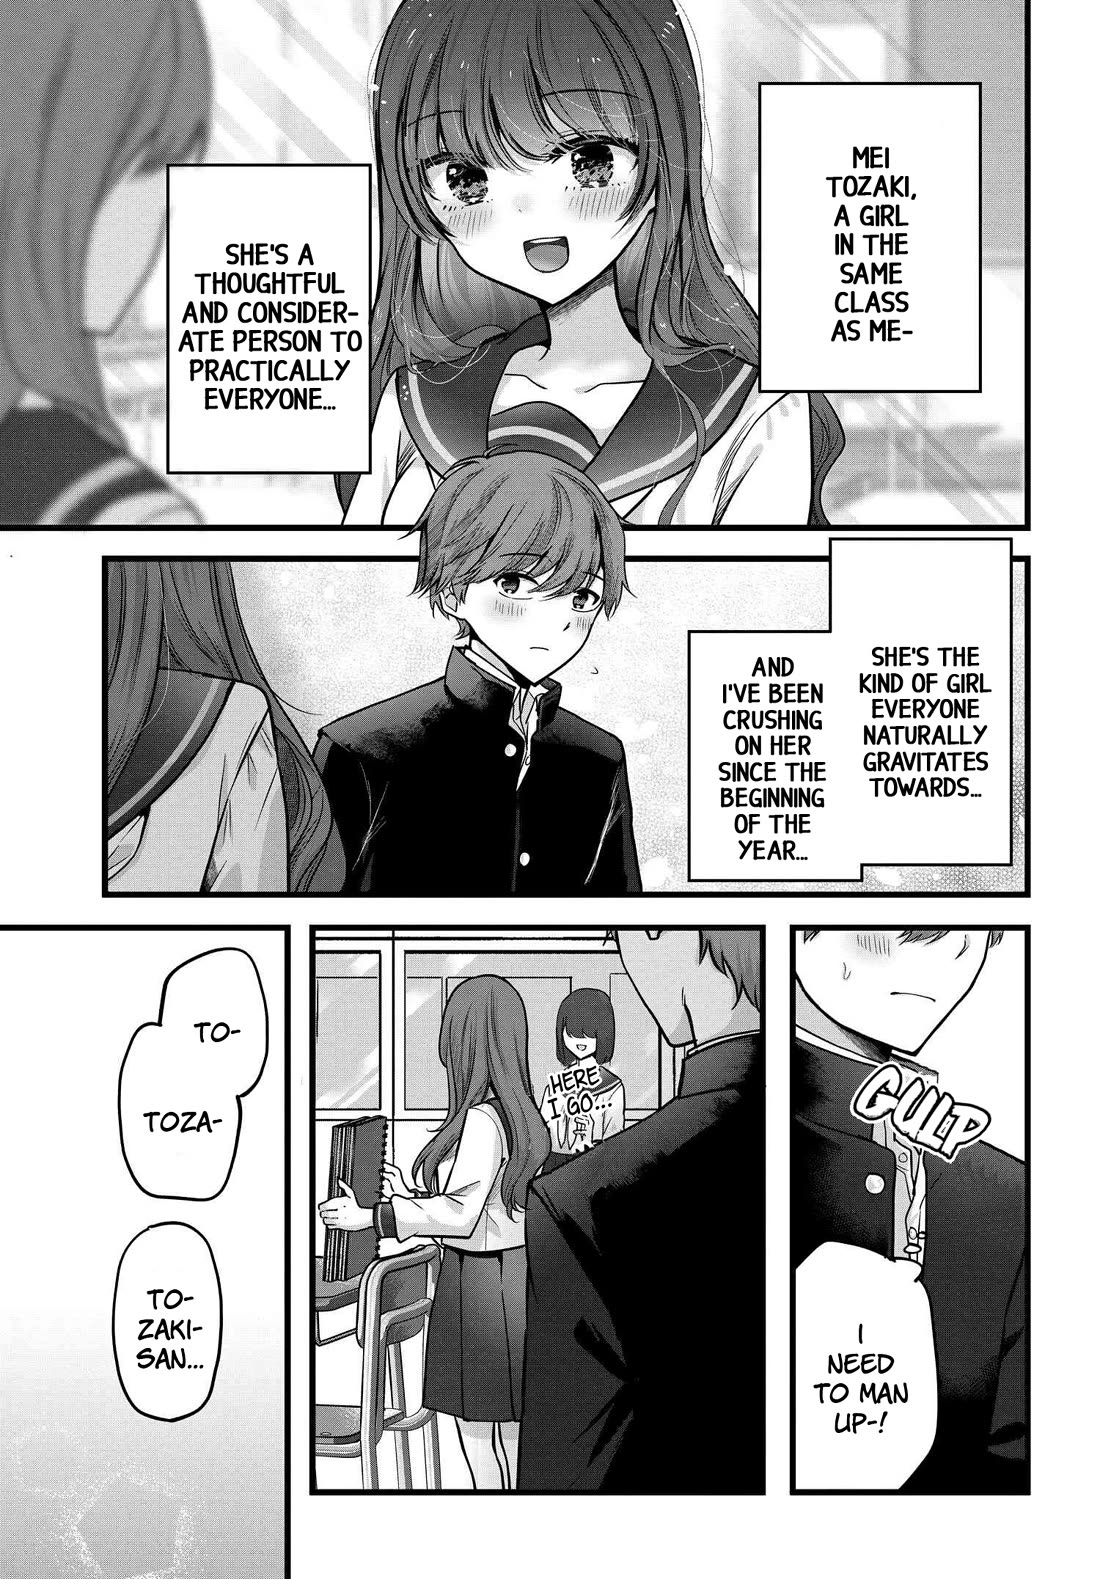 Tozaki-san Is Cold Only to Me - chapter 1 - #2